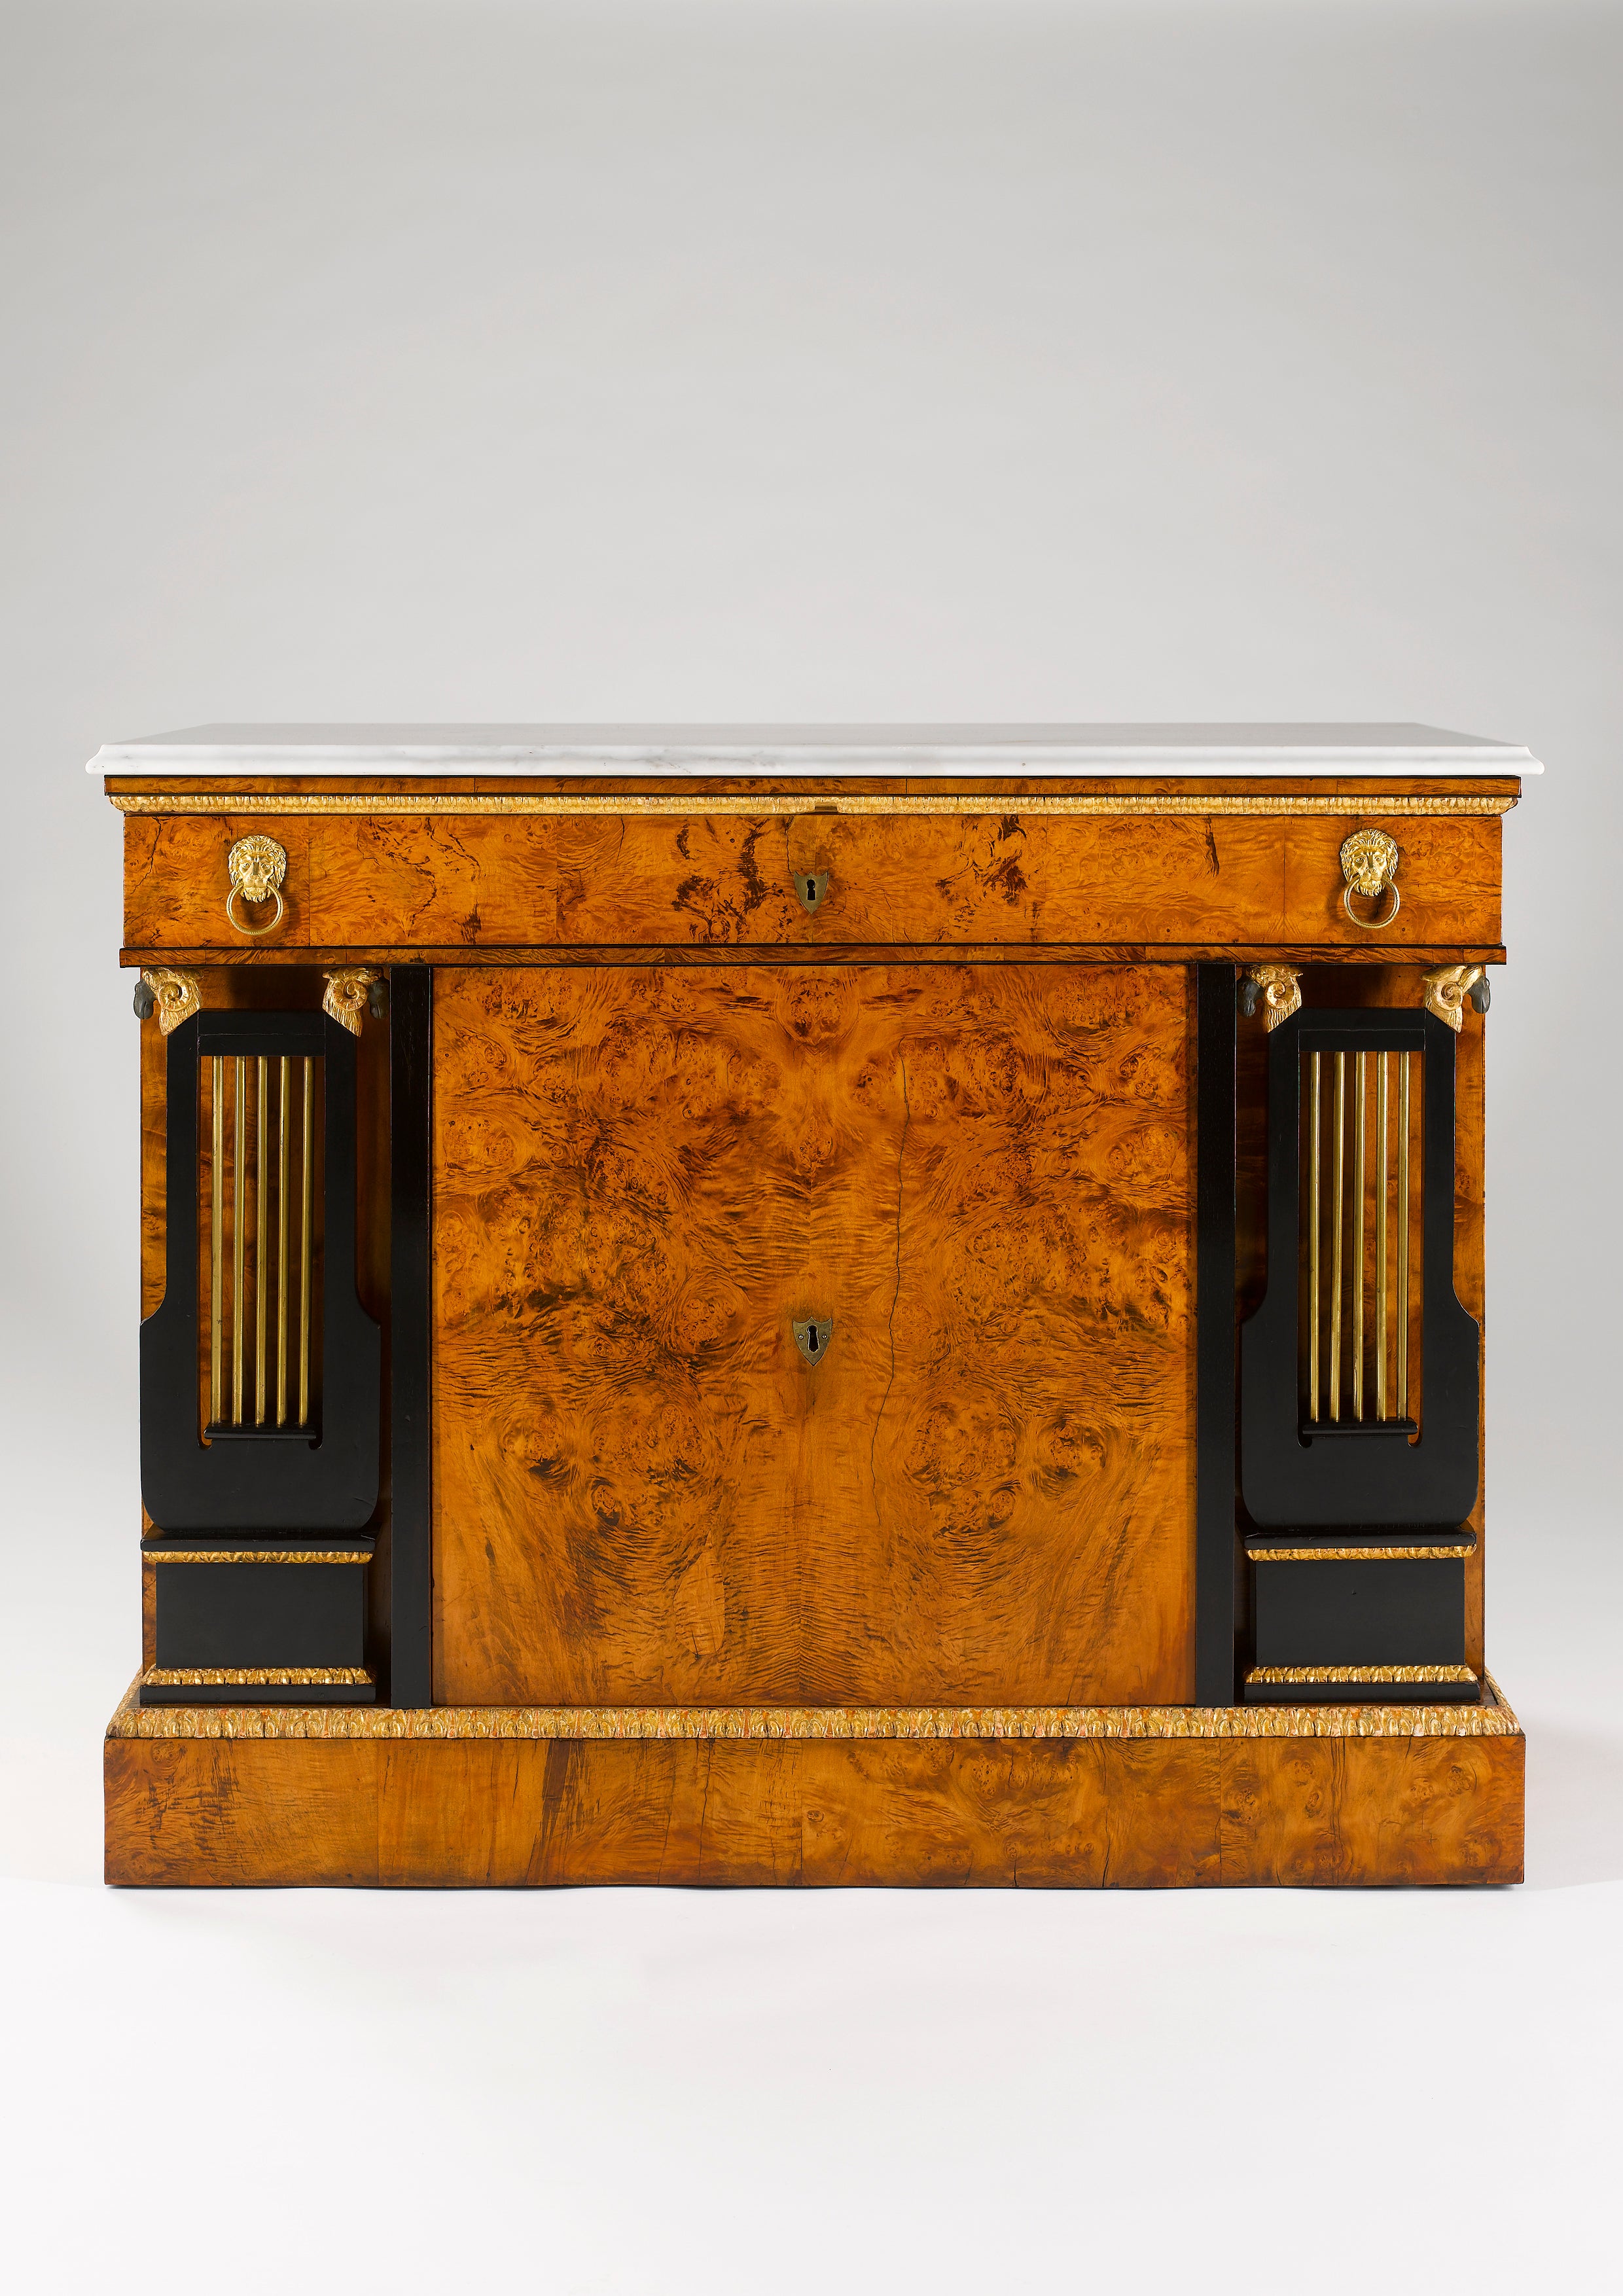 Viennese Early 19th Century Empire Commode